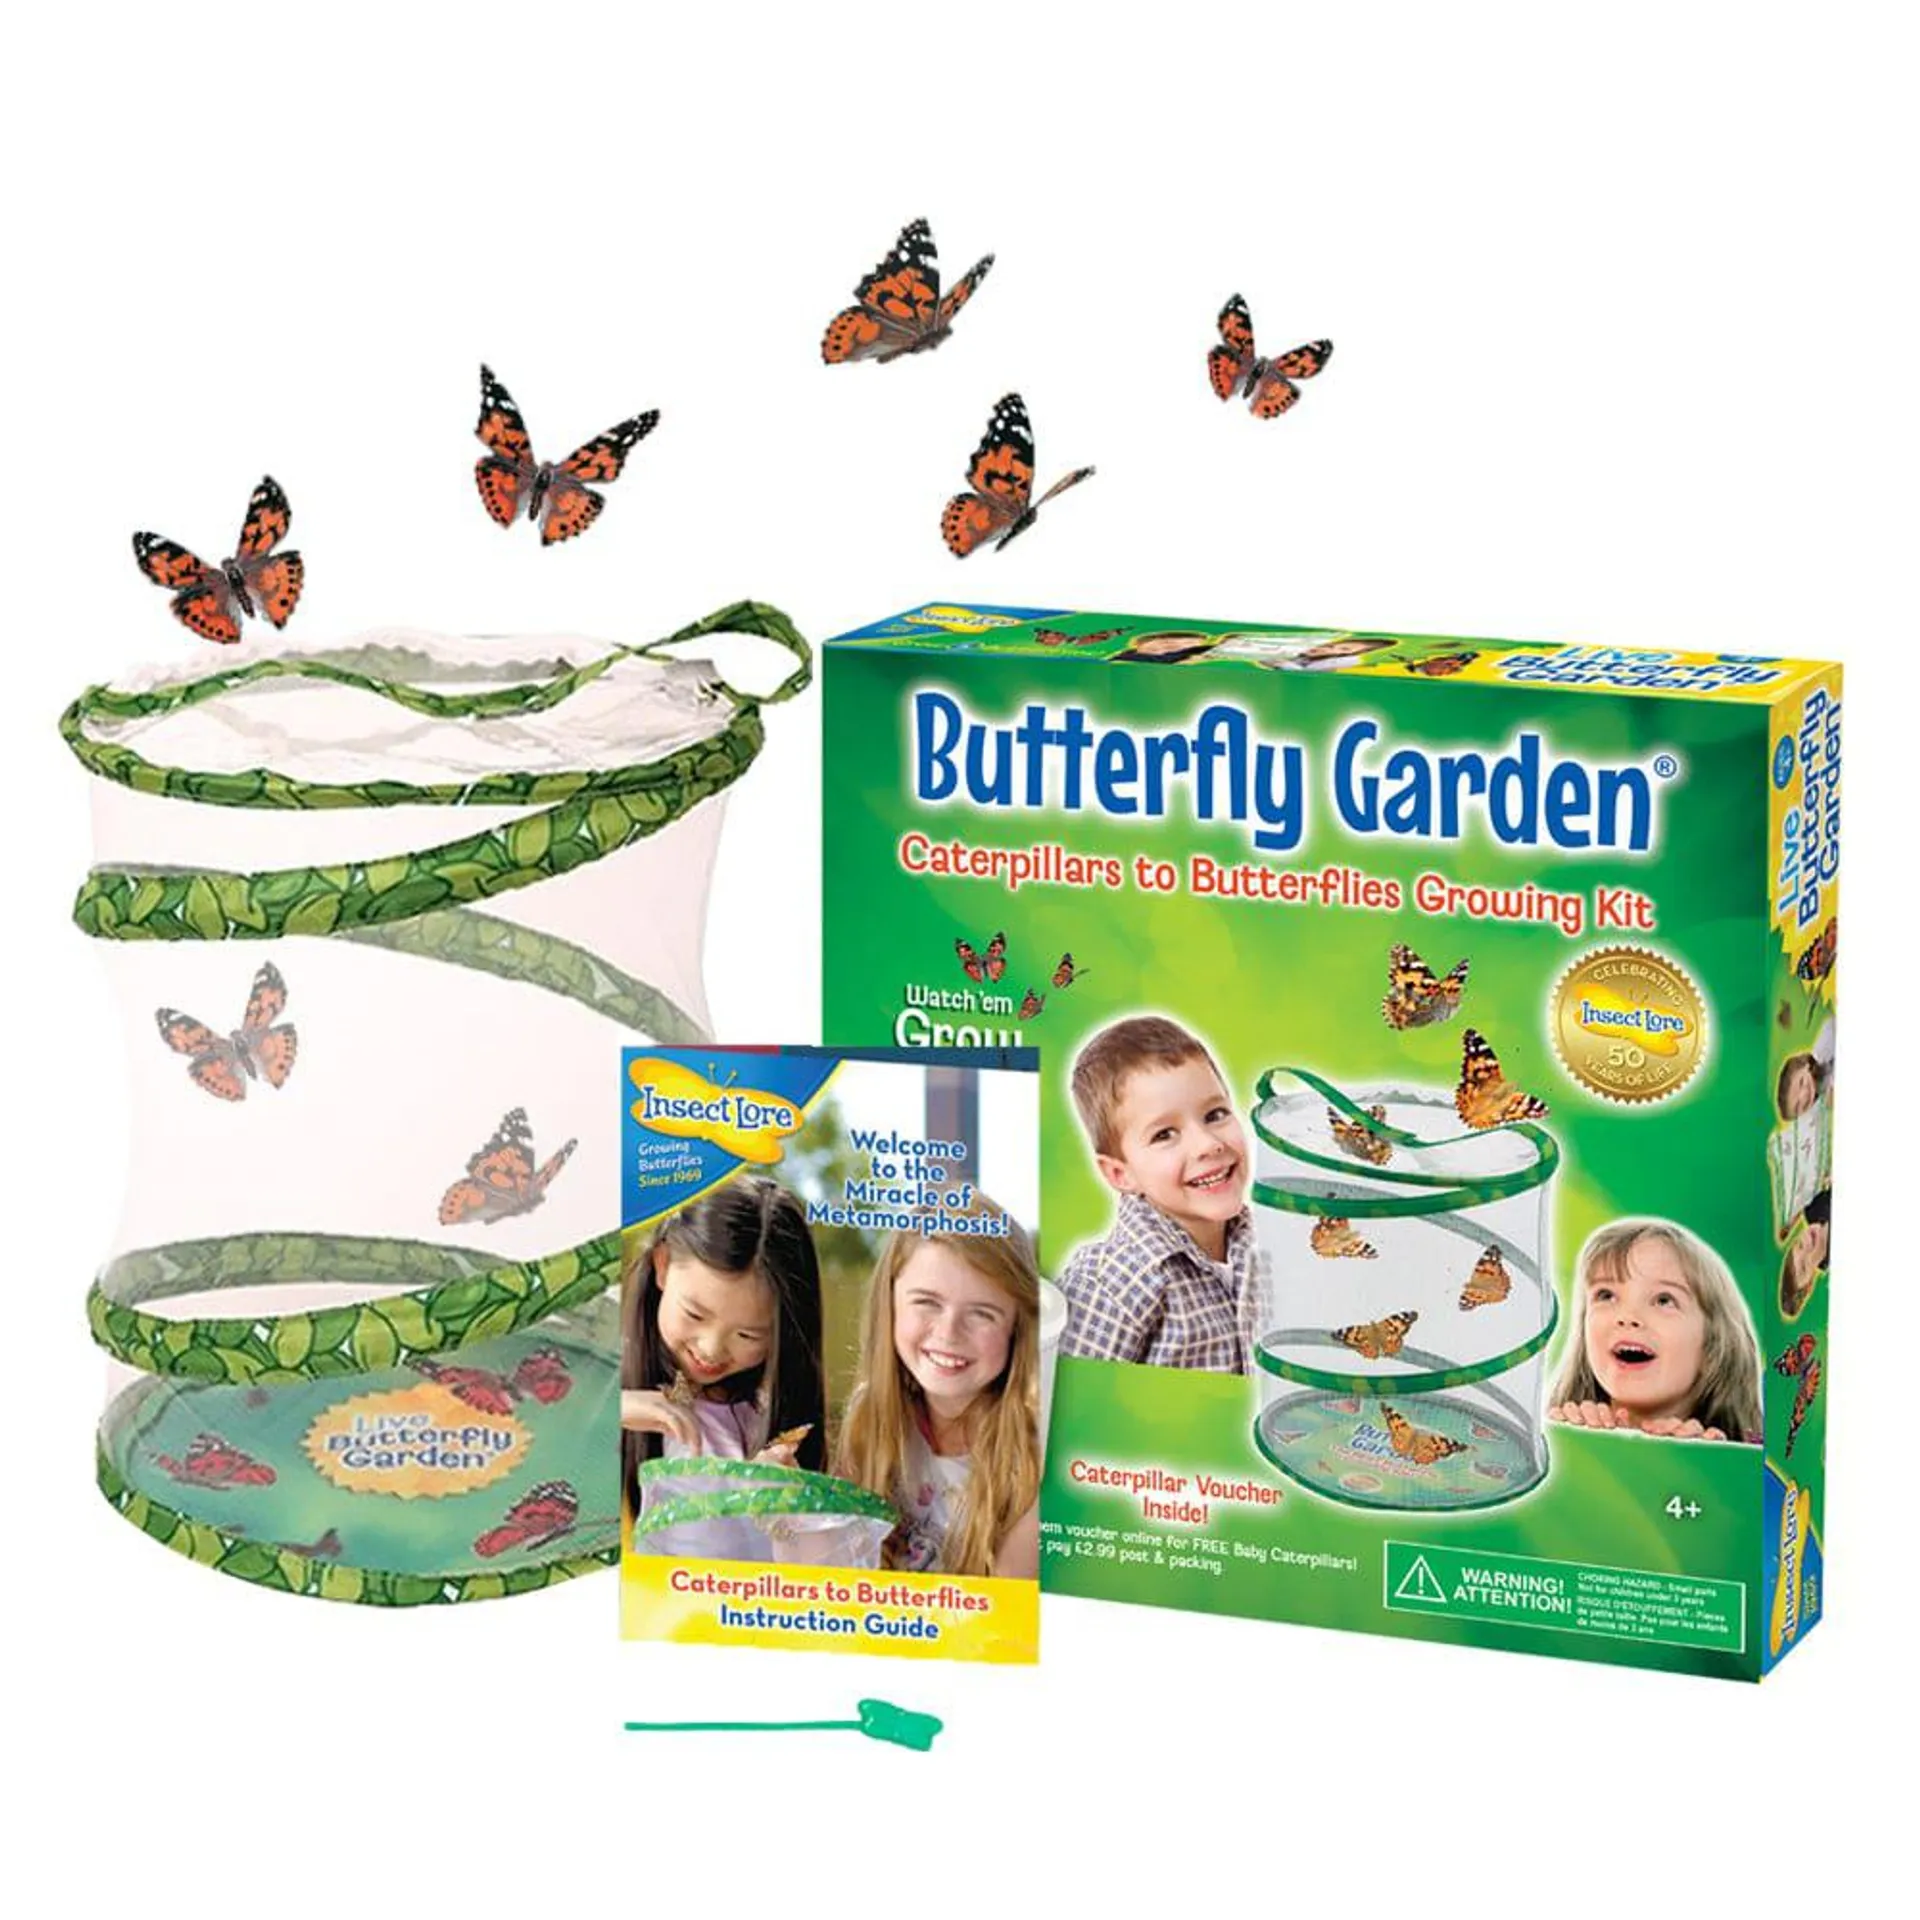 Butterfly Garden Kit with live voucher